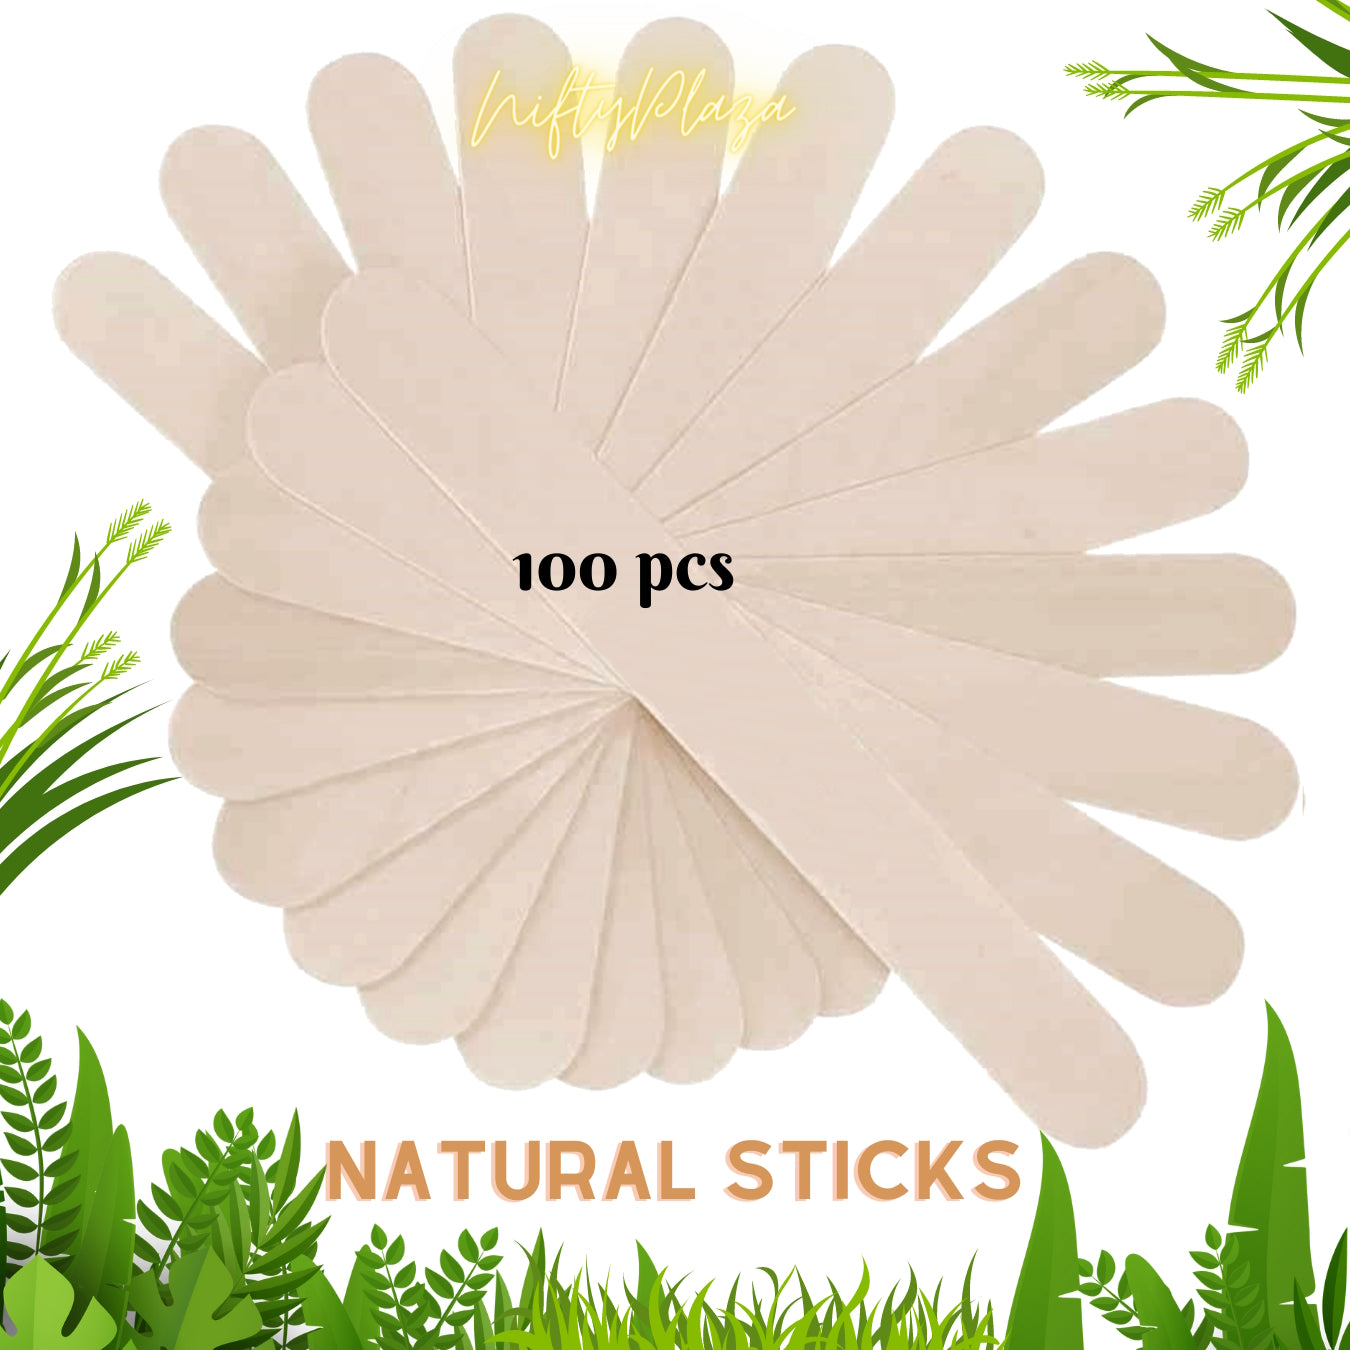 NiftyPlaza 100 Pieces Jumbo Craft Sticks, Natural Wood for Building, Mixing, Creating Craft Projects, 6 x 3/4